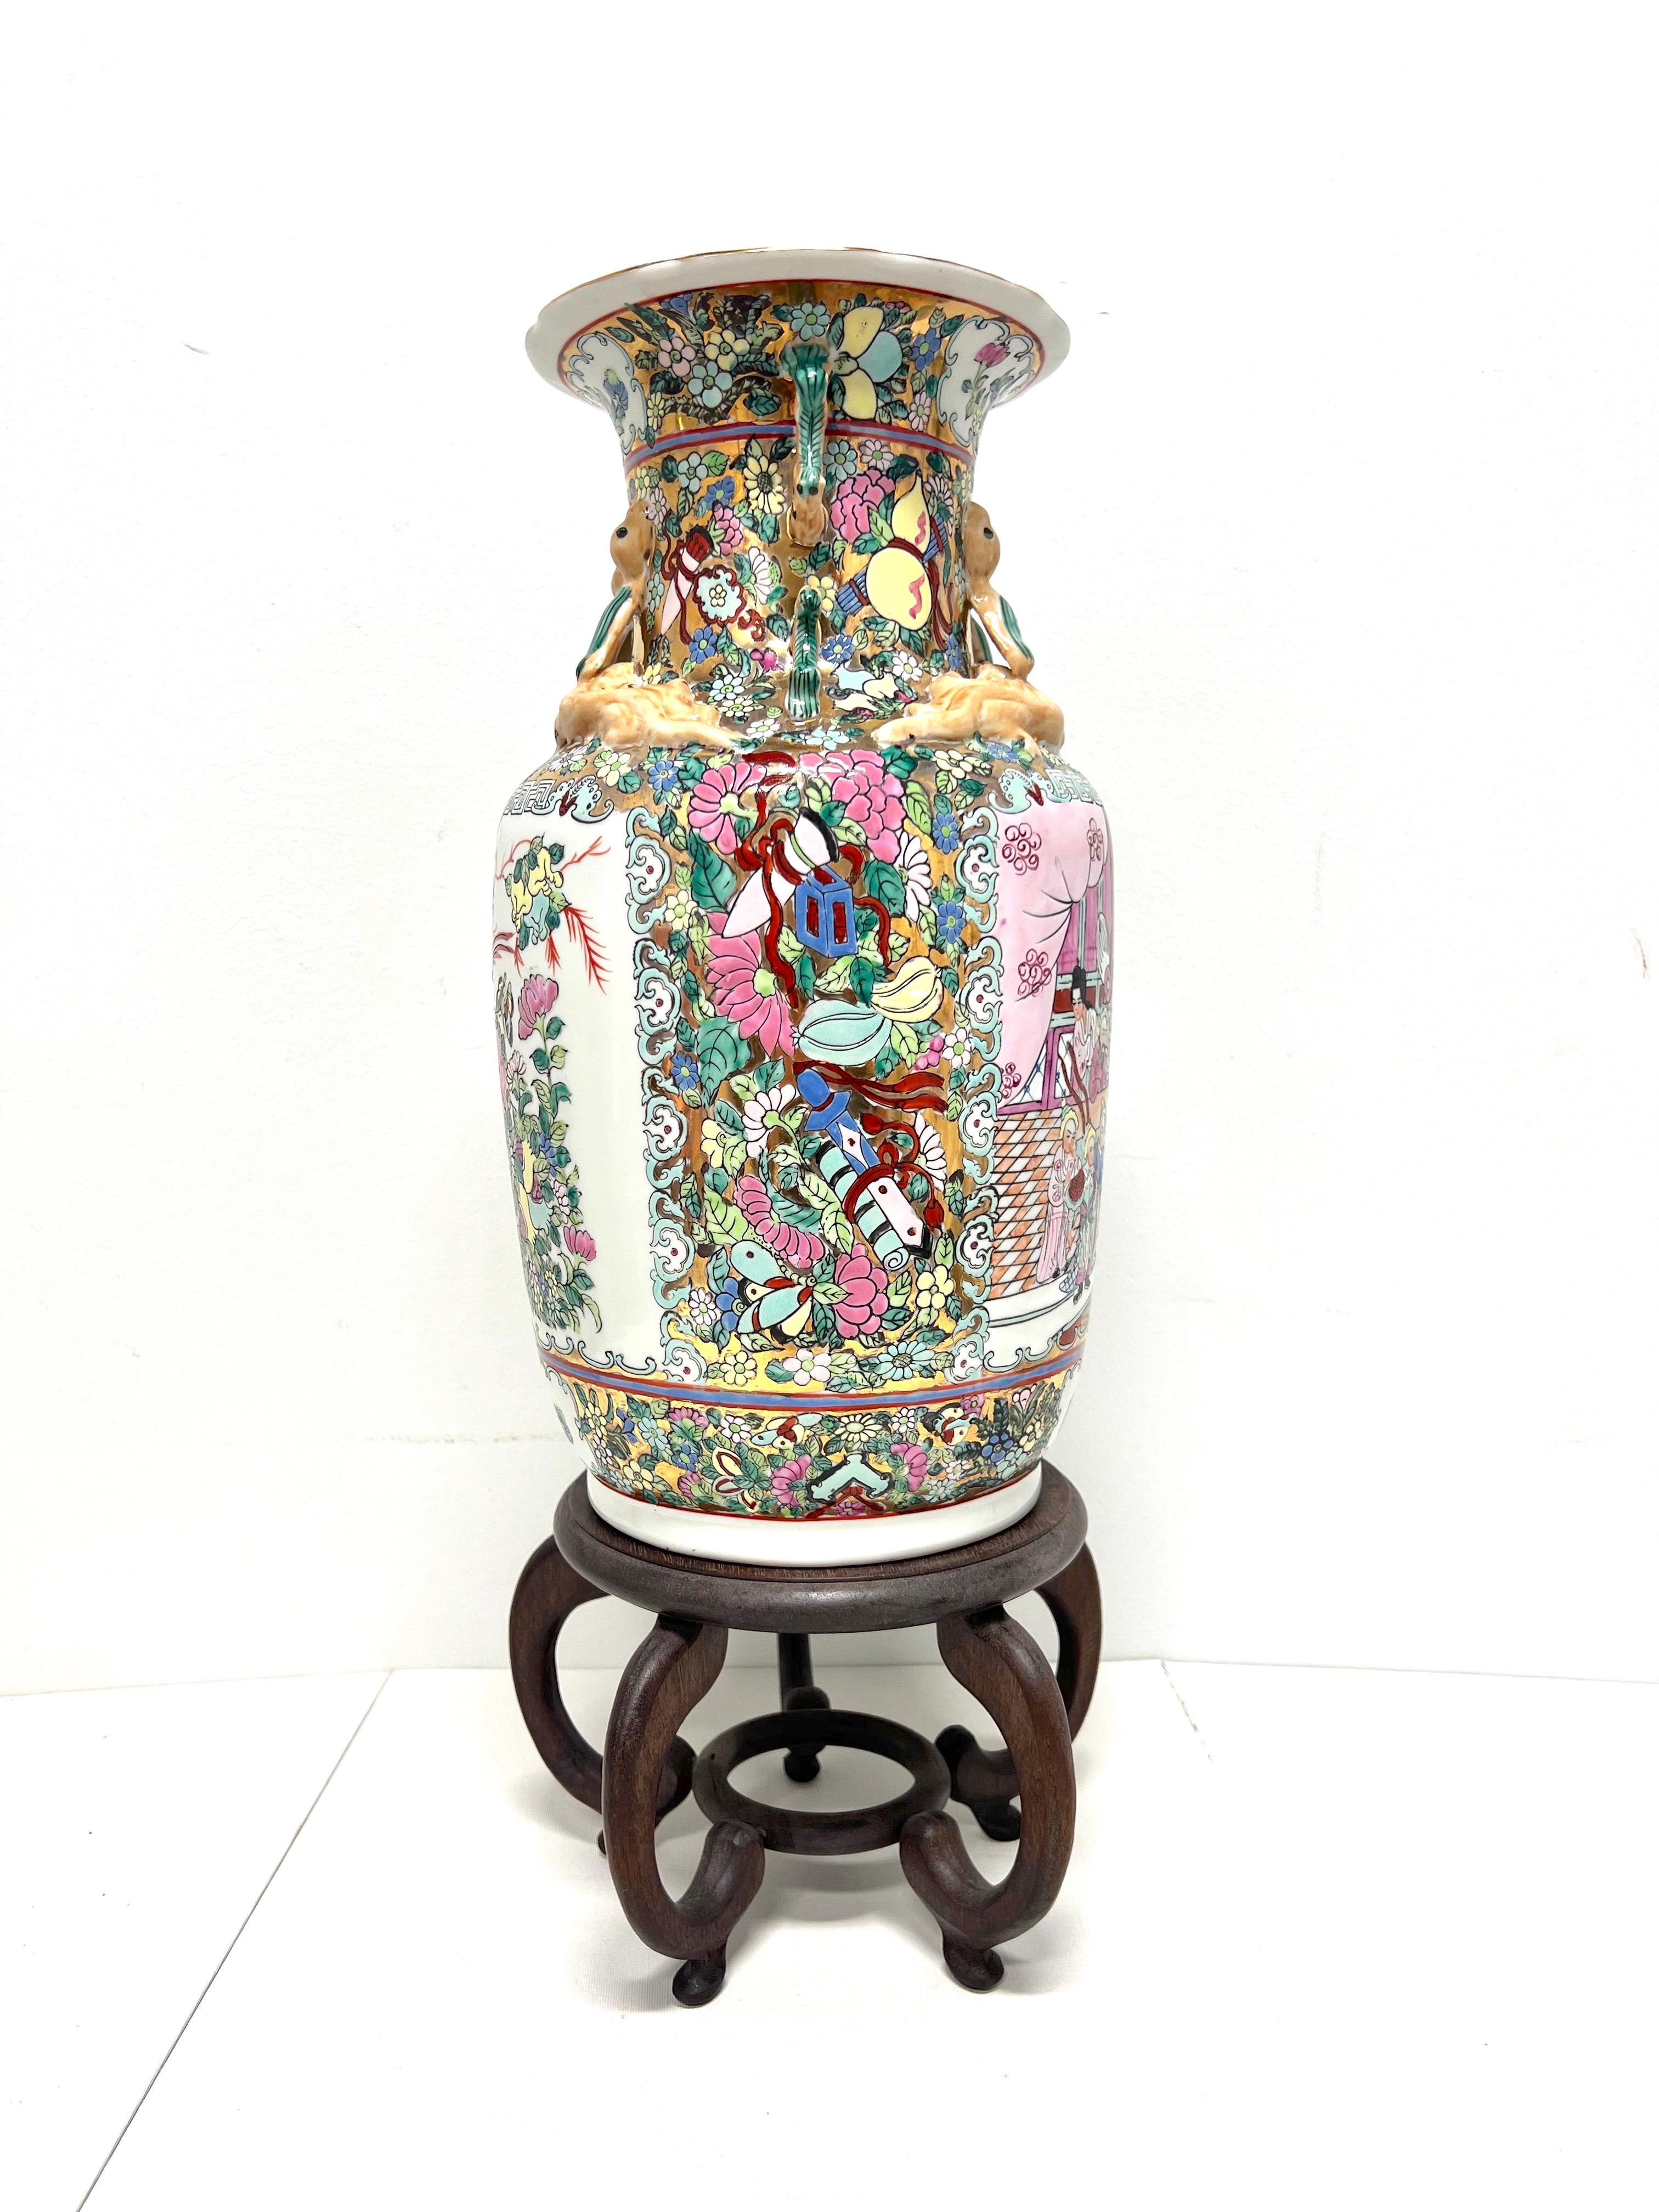 A Mid 20th Century Asian style decorative porcelain vase with stand, unbranded. A beautiful multi-color porcelain urn shaped vase with hand painted Chinoiserie scenes, a textured finish, and a separate decoratively carved round elevated wood stand.